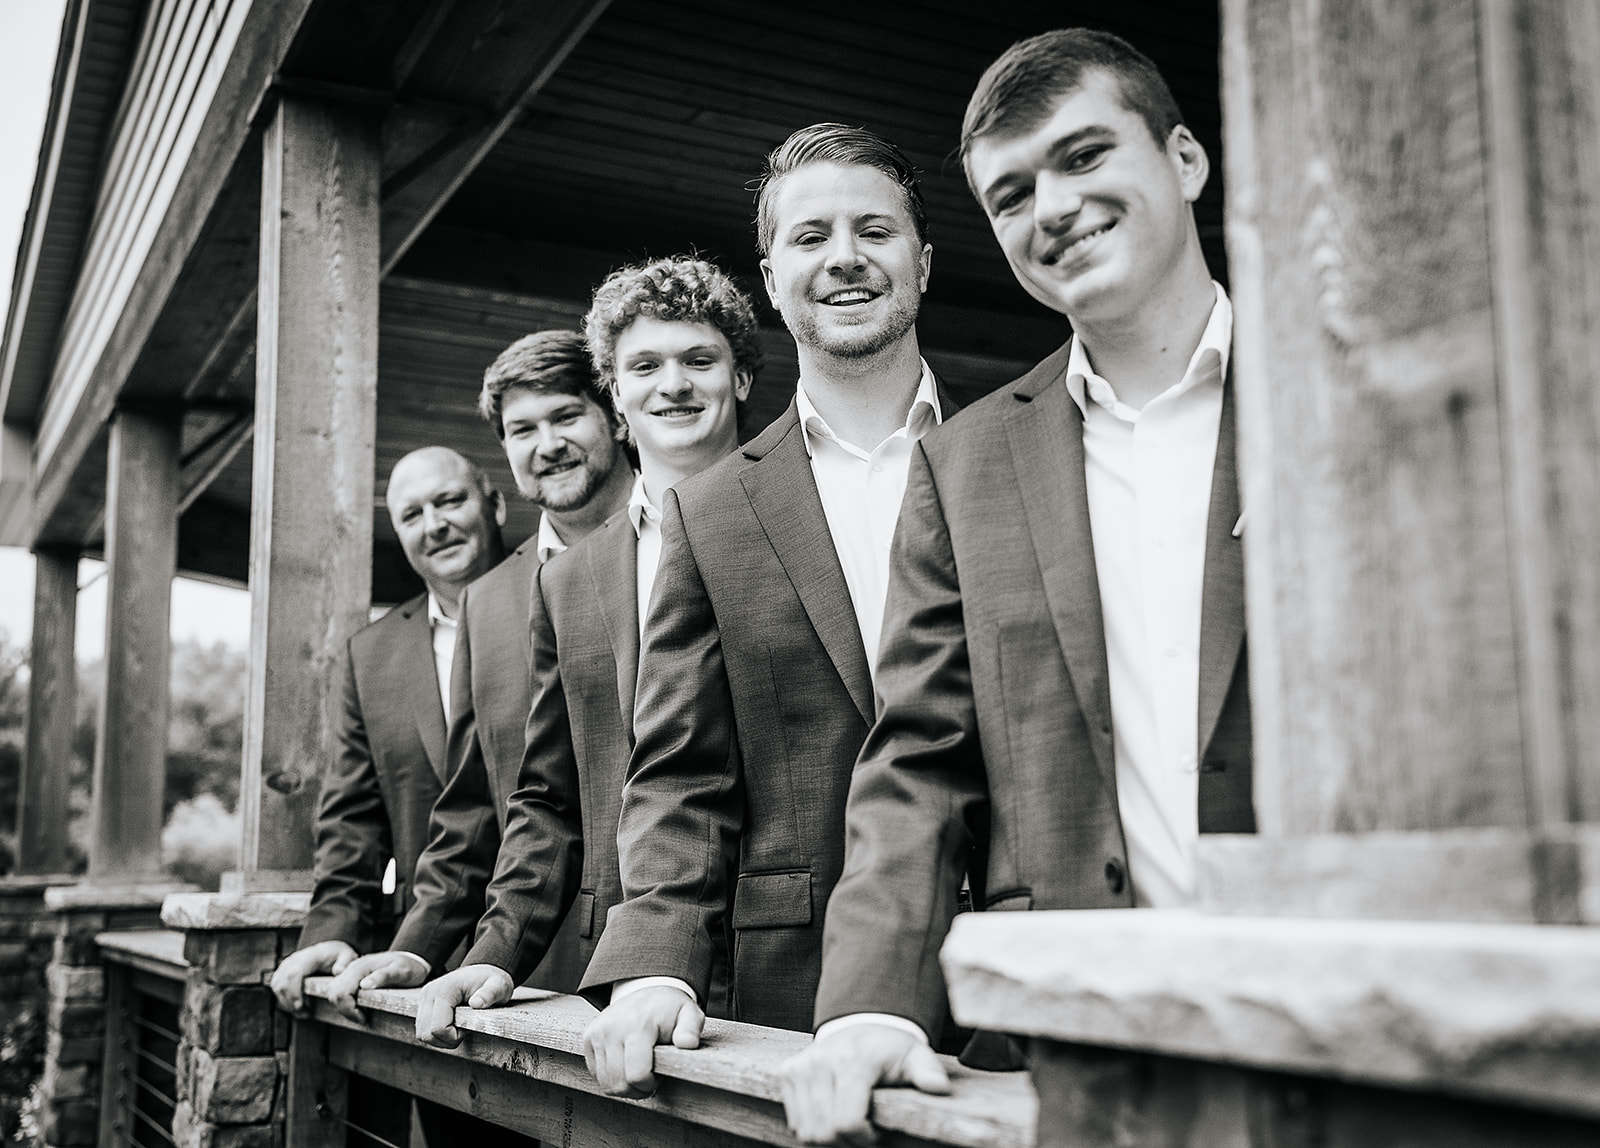 Black and white bridal party image of groomsmen